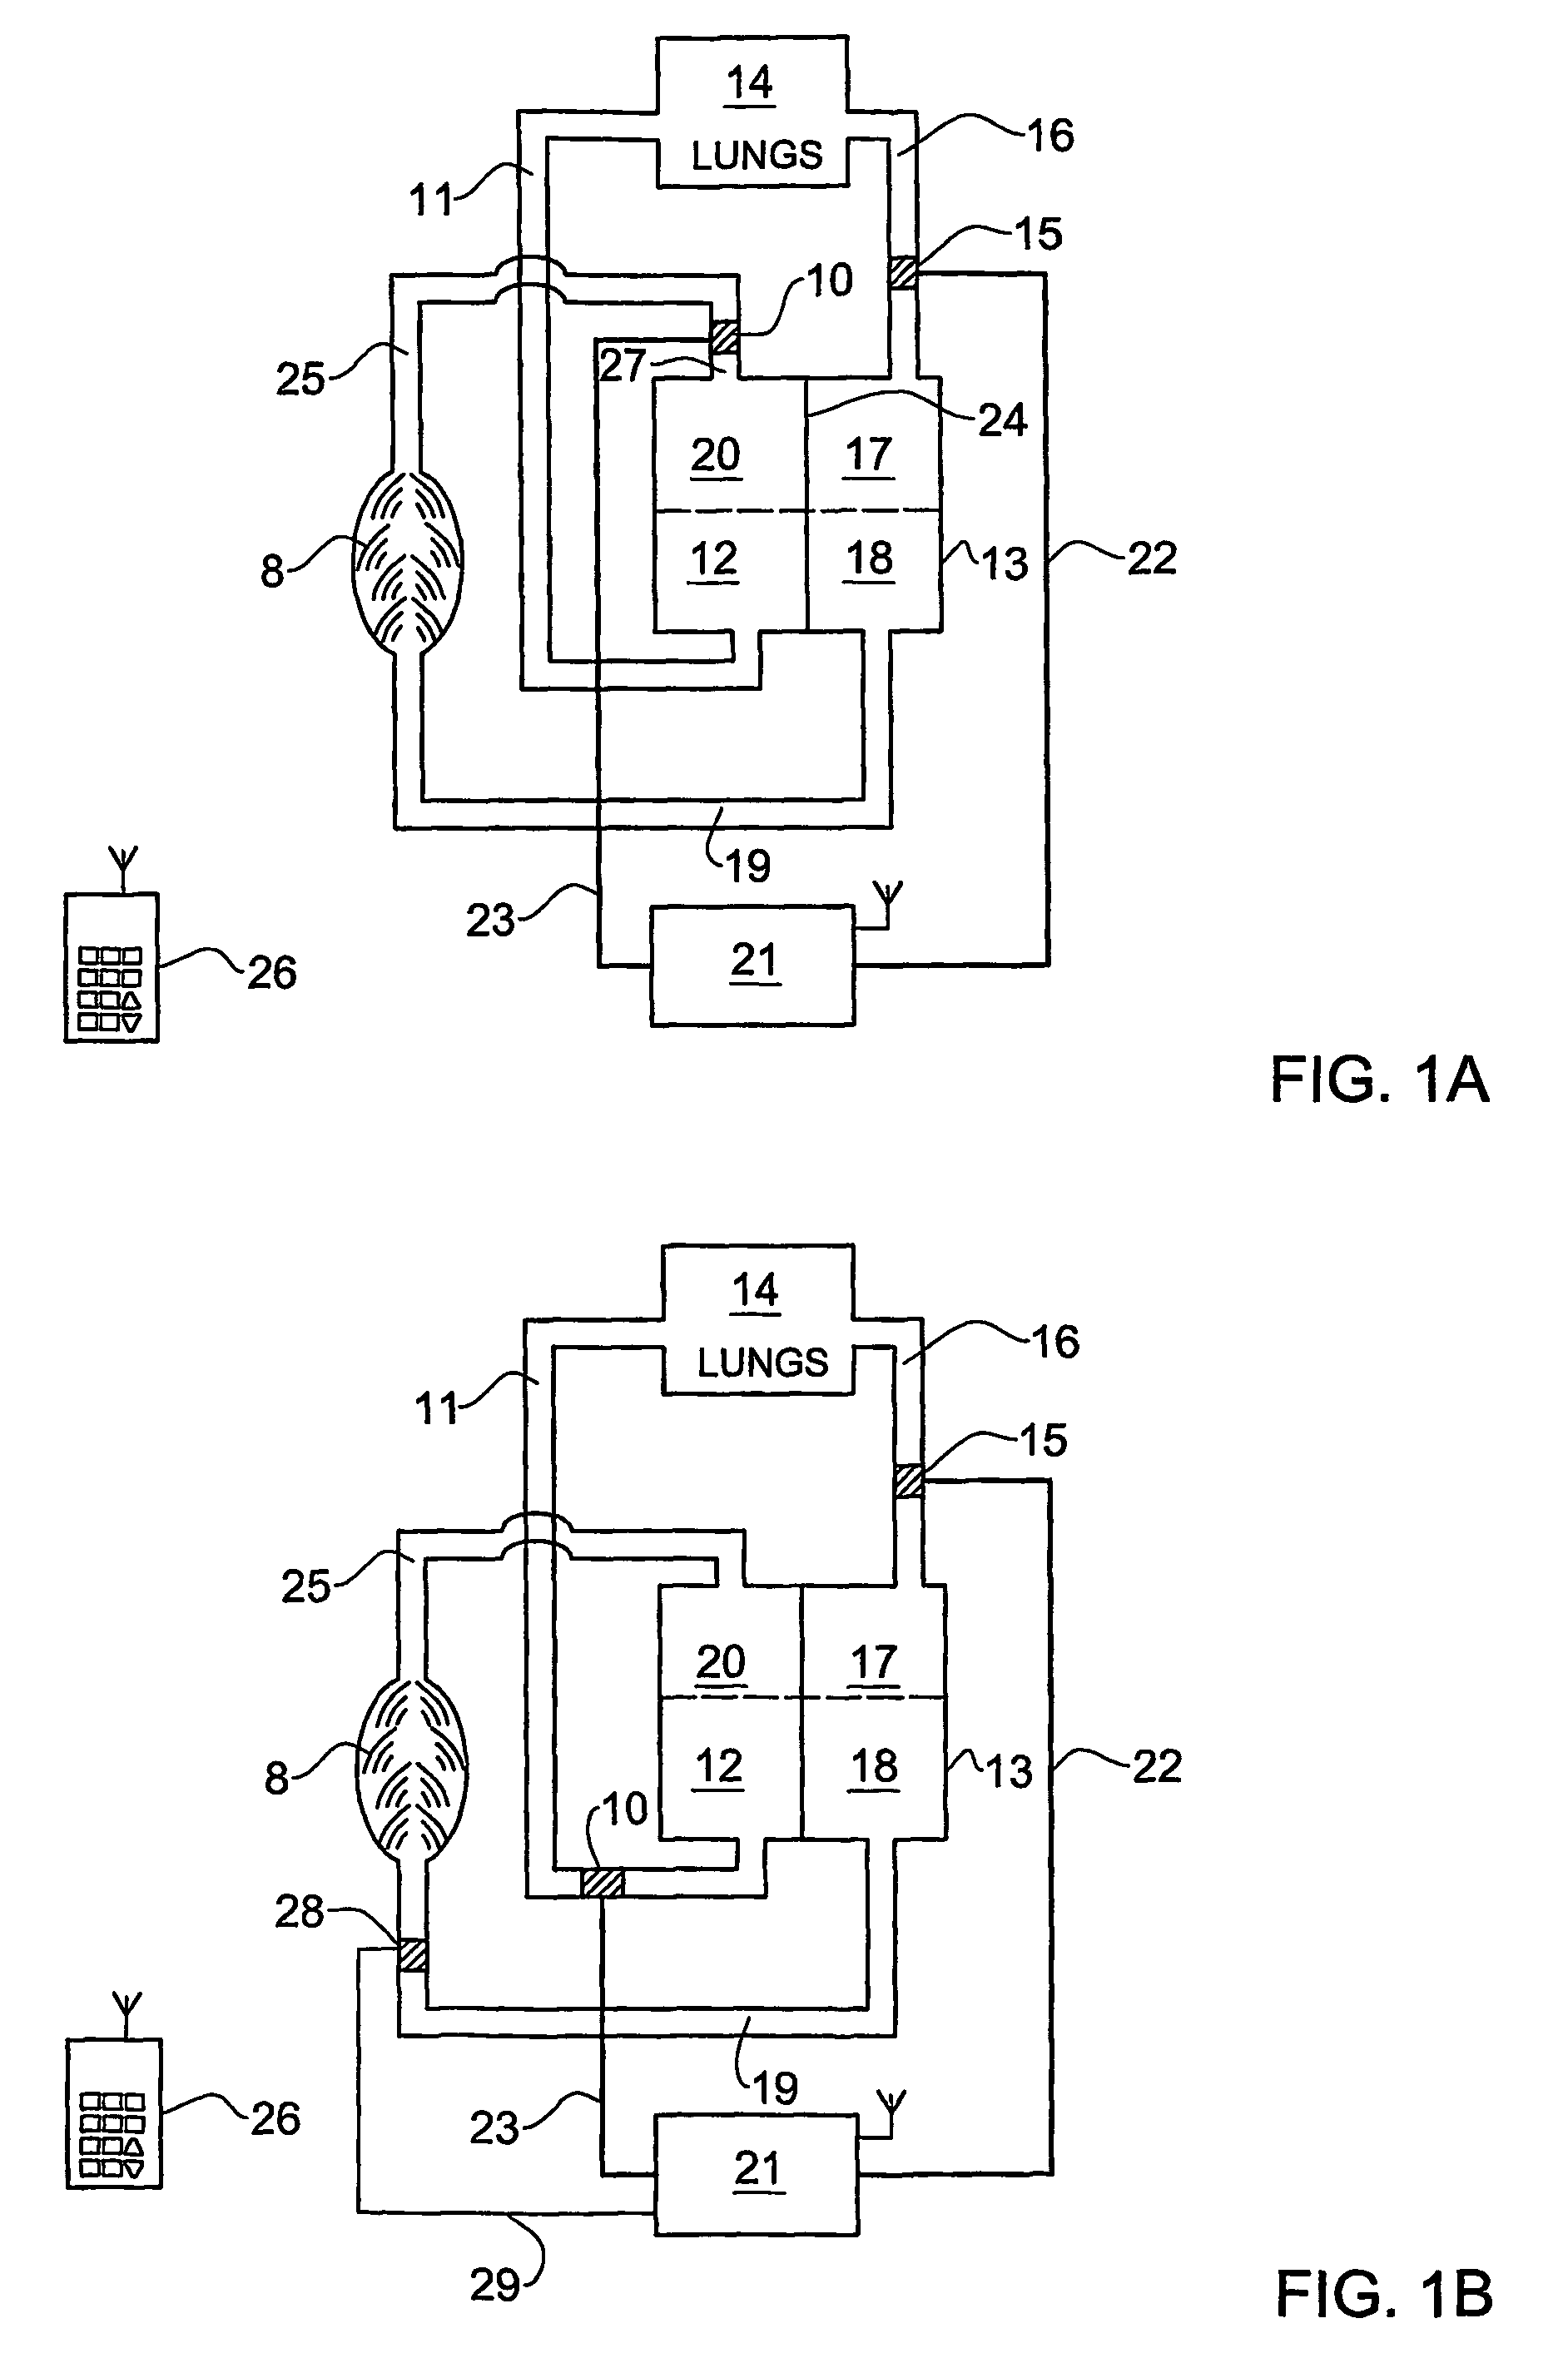 Device and method for regulating blood flow